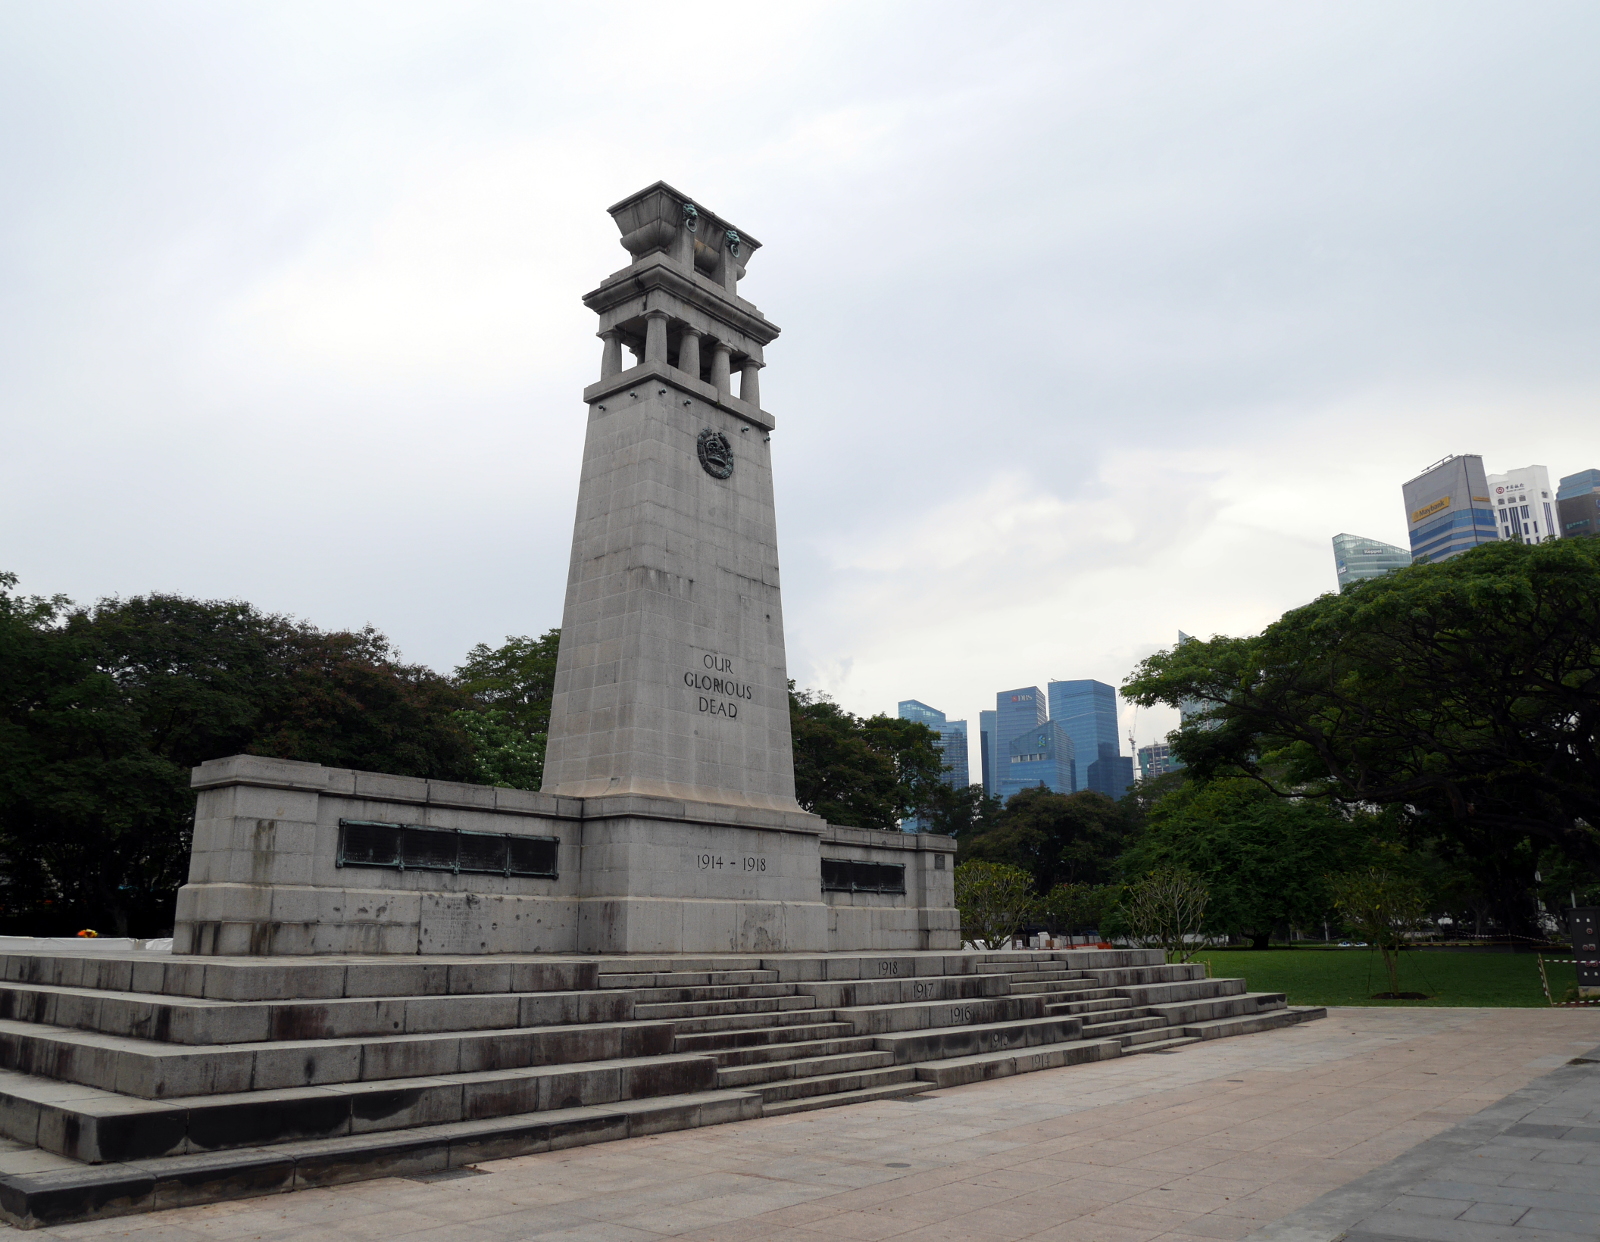 Singapore's monument to the Great War, which is inscribed in honor of the fallen of World War II on the back side.